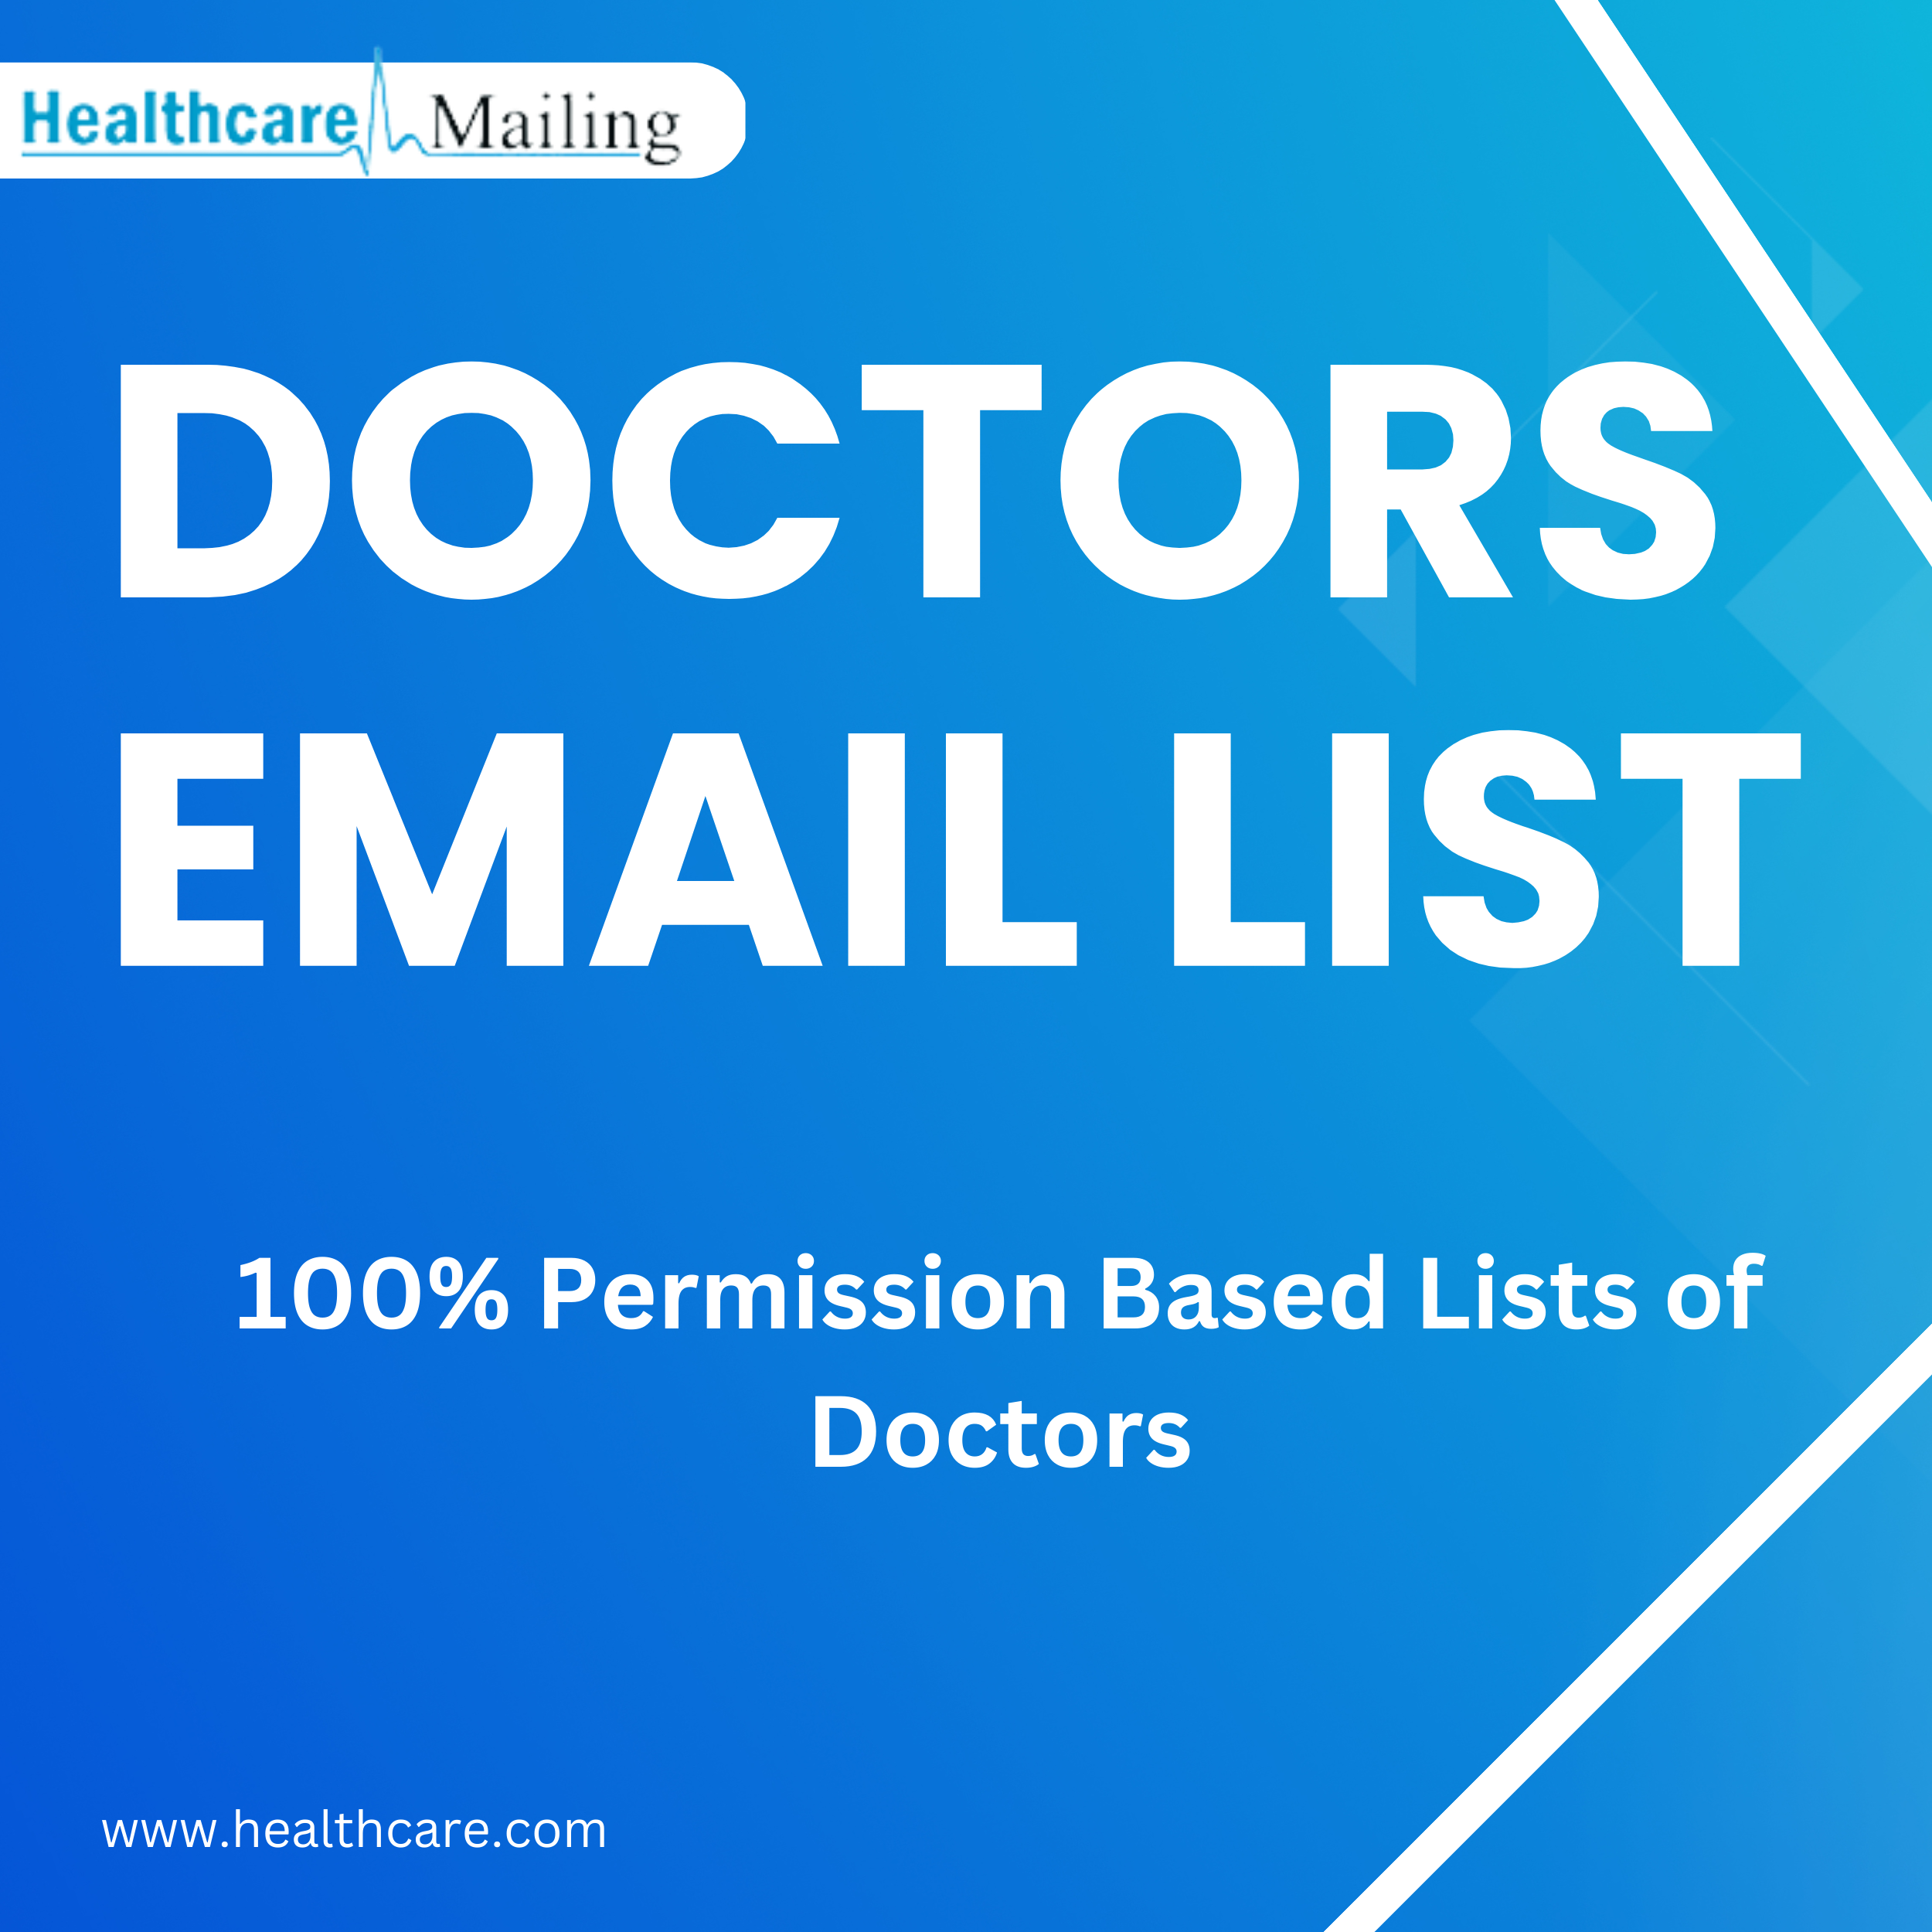 Healthcare Mailing

DOCTORS
EMAIL LIST

100% Permission Based Lists of
Doctors

www.healthcare.com